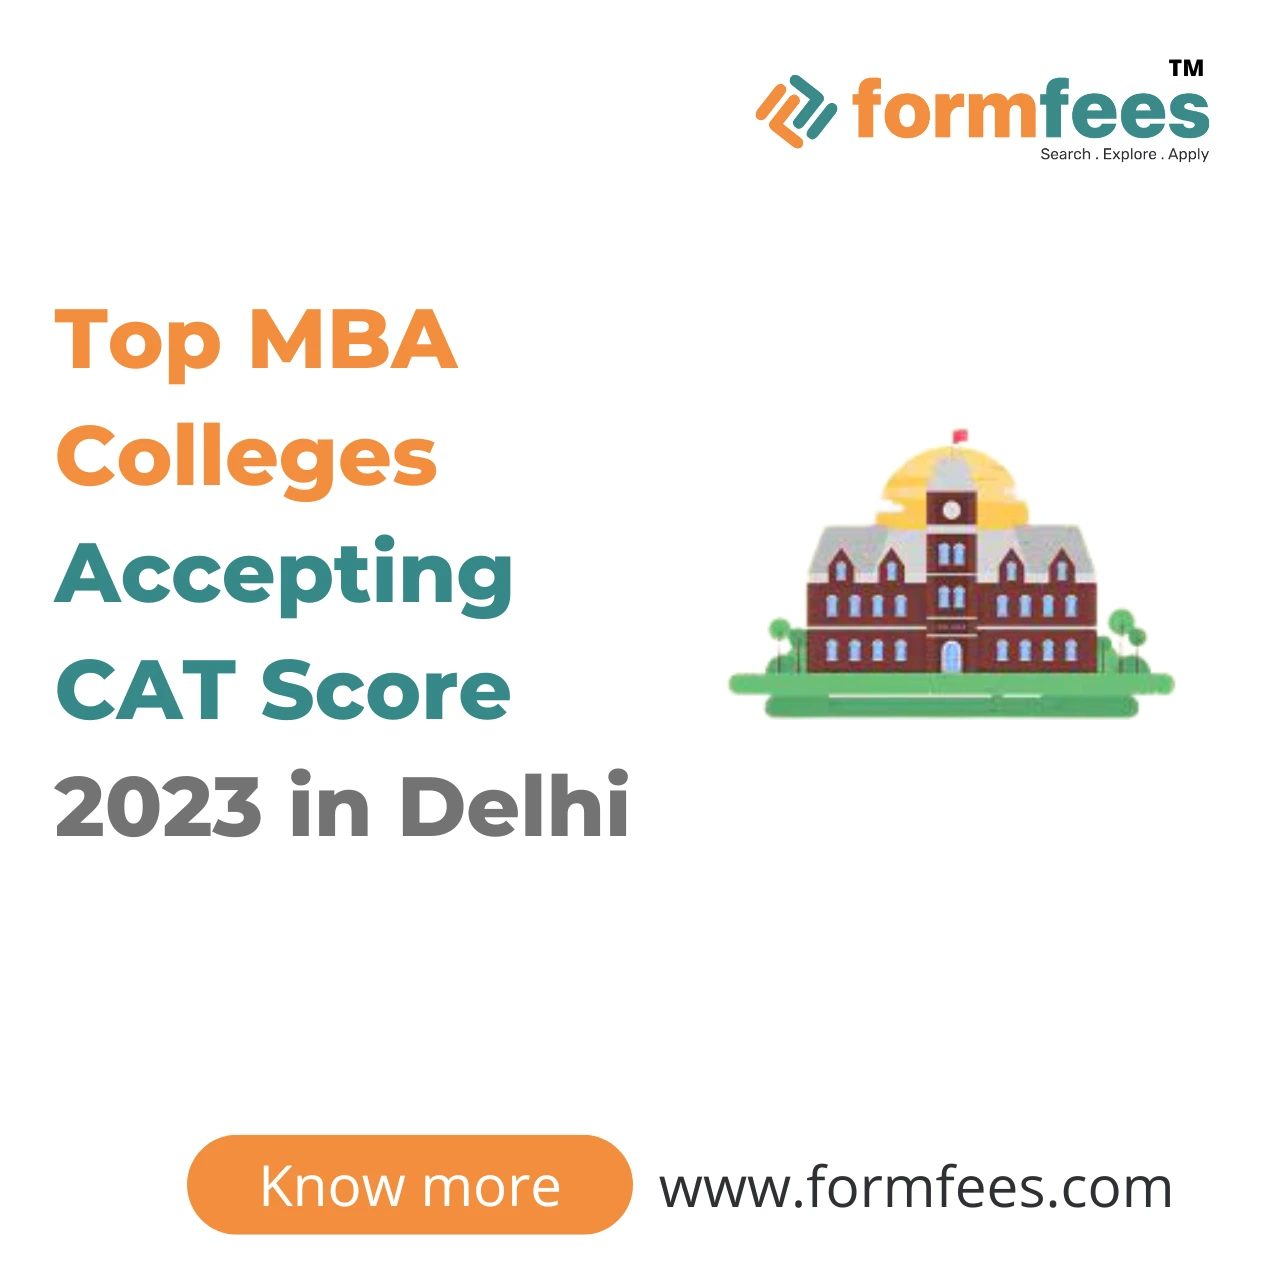 Top MBA Colleges Accepting CAT Score 2023 in Delhi